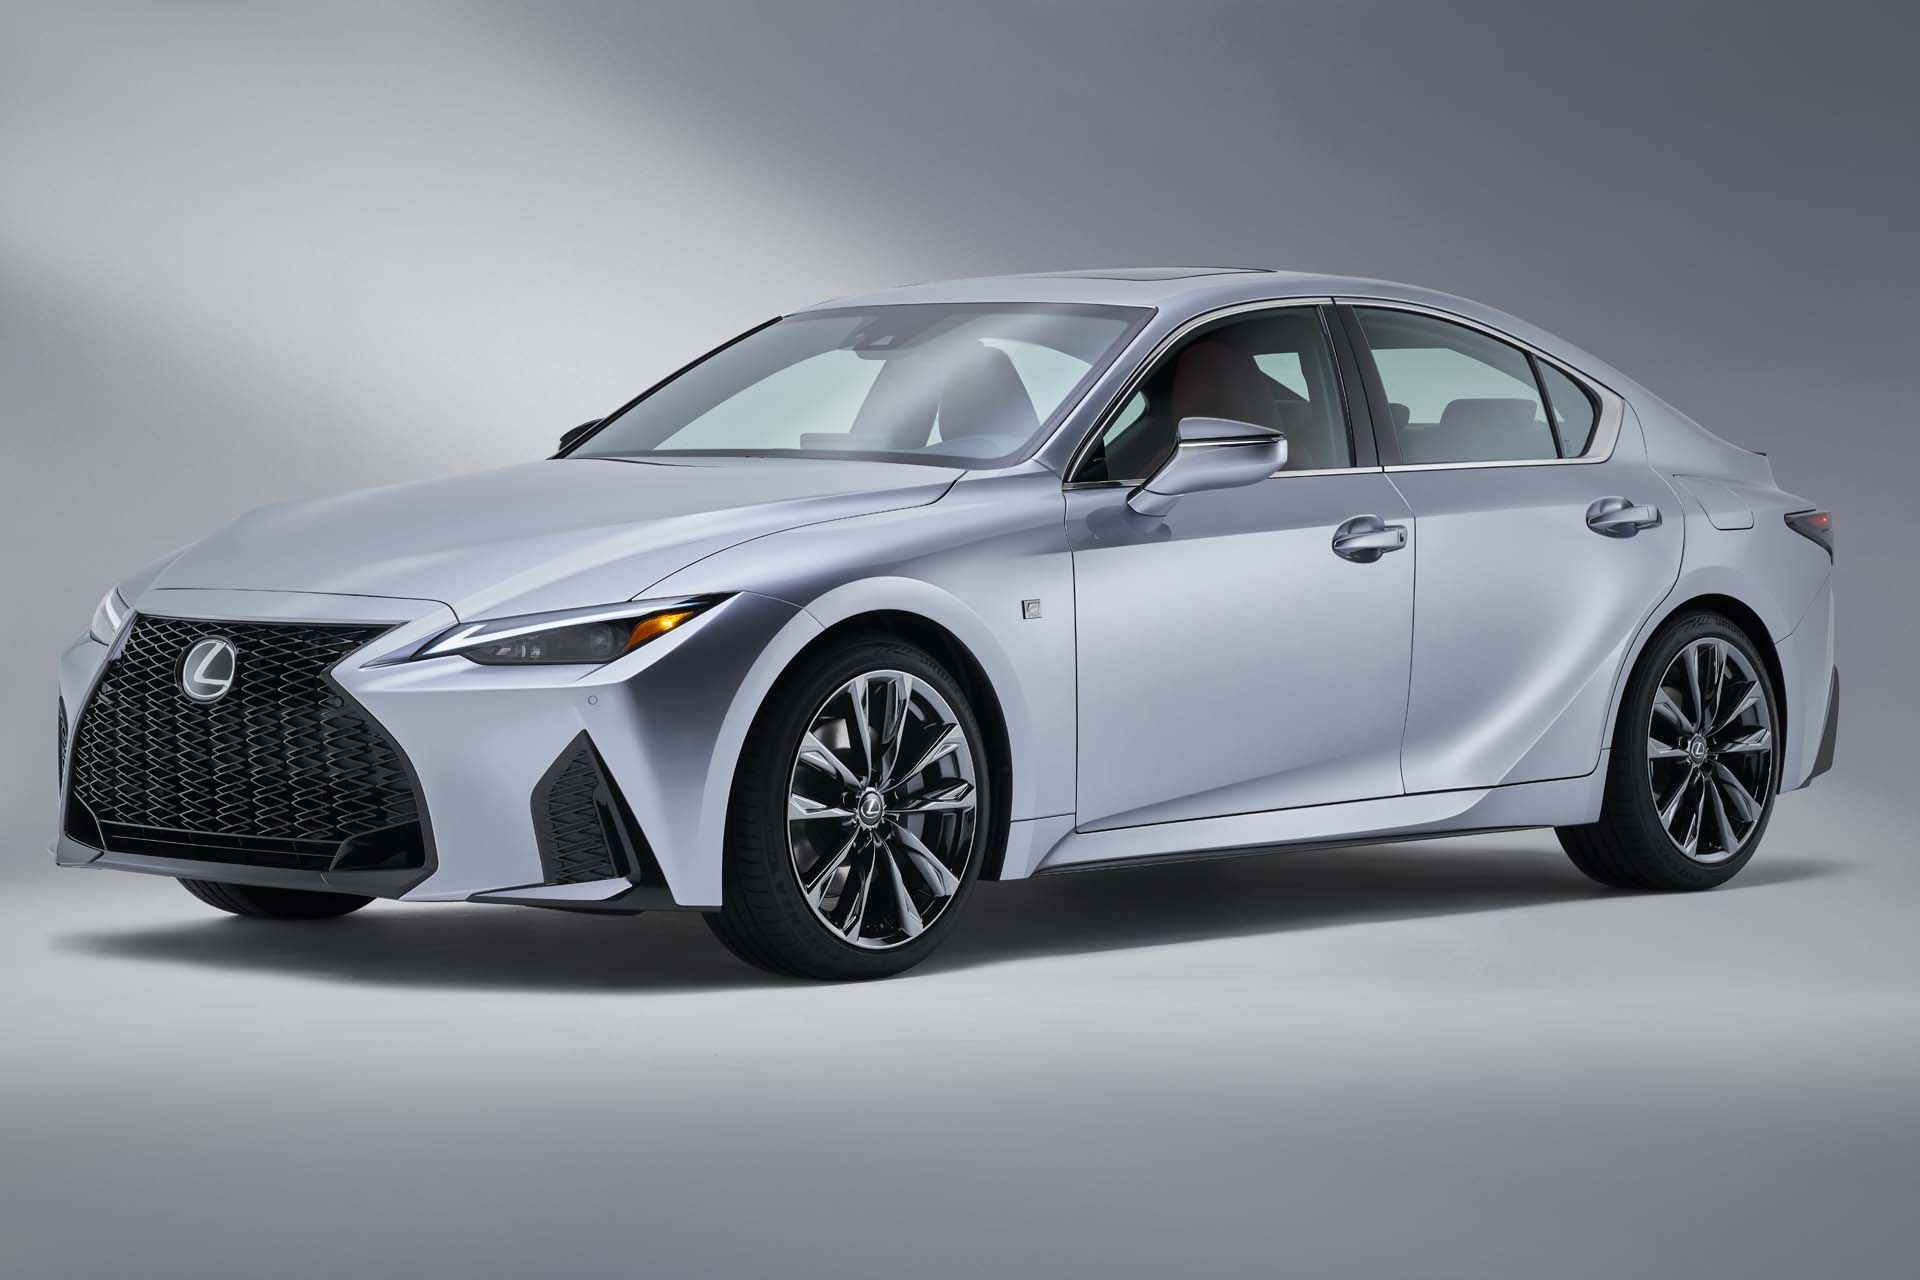 Lexus IS preview: This one's honed on the track